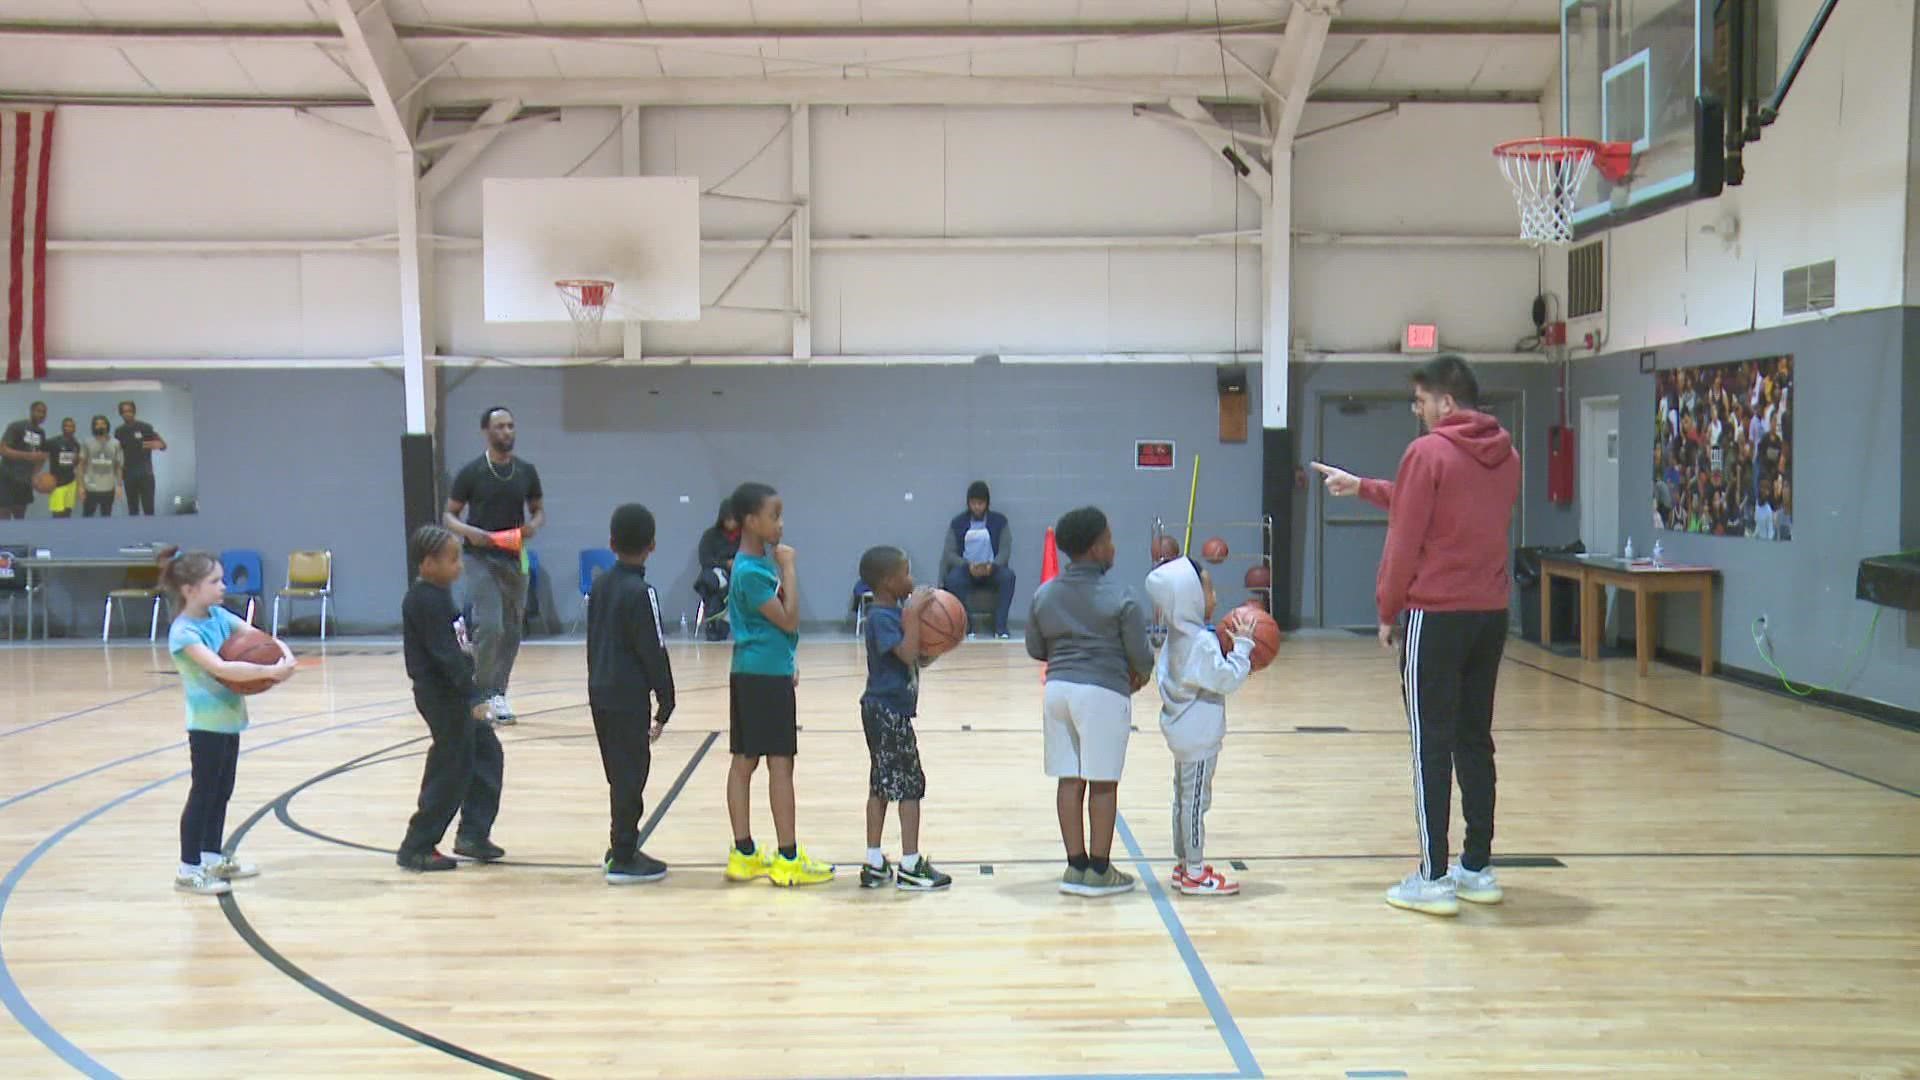 The league launched in January 2022 with its basketball program and over the year, it paired LMPD officers with local kids for activities like archery and fishing.